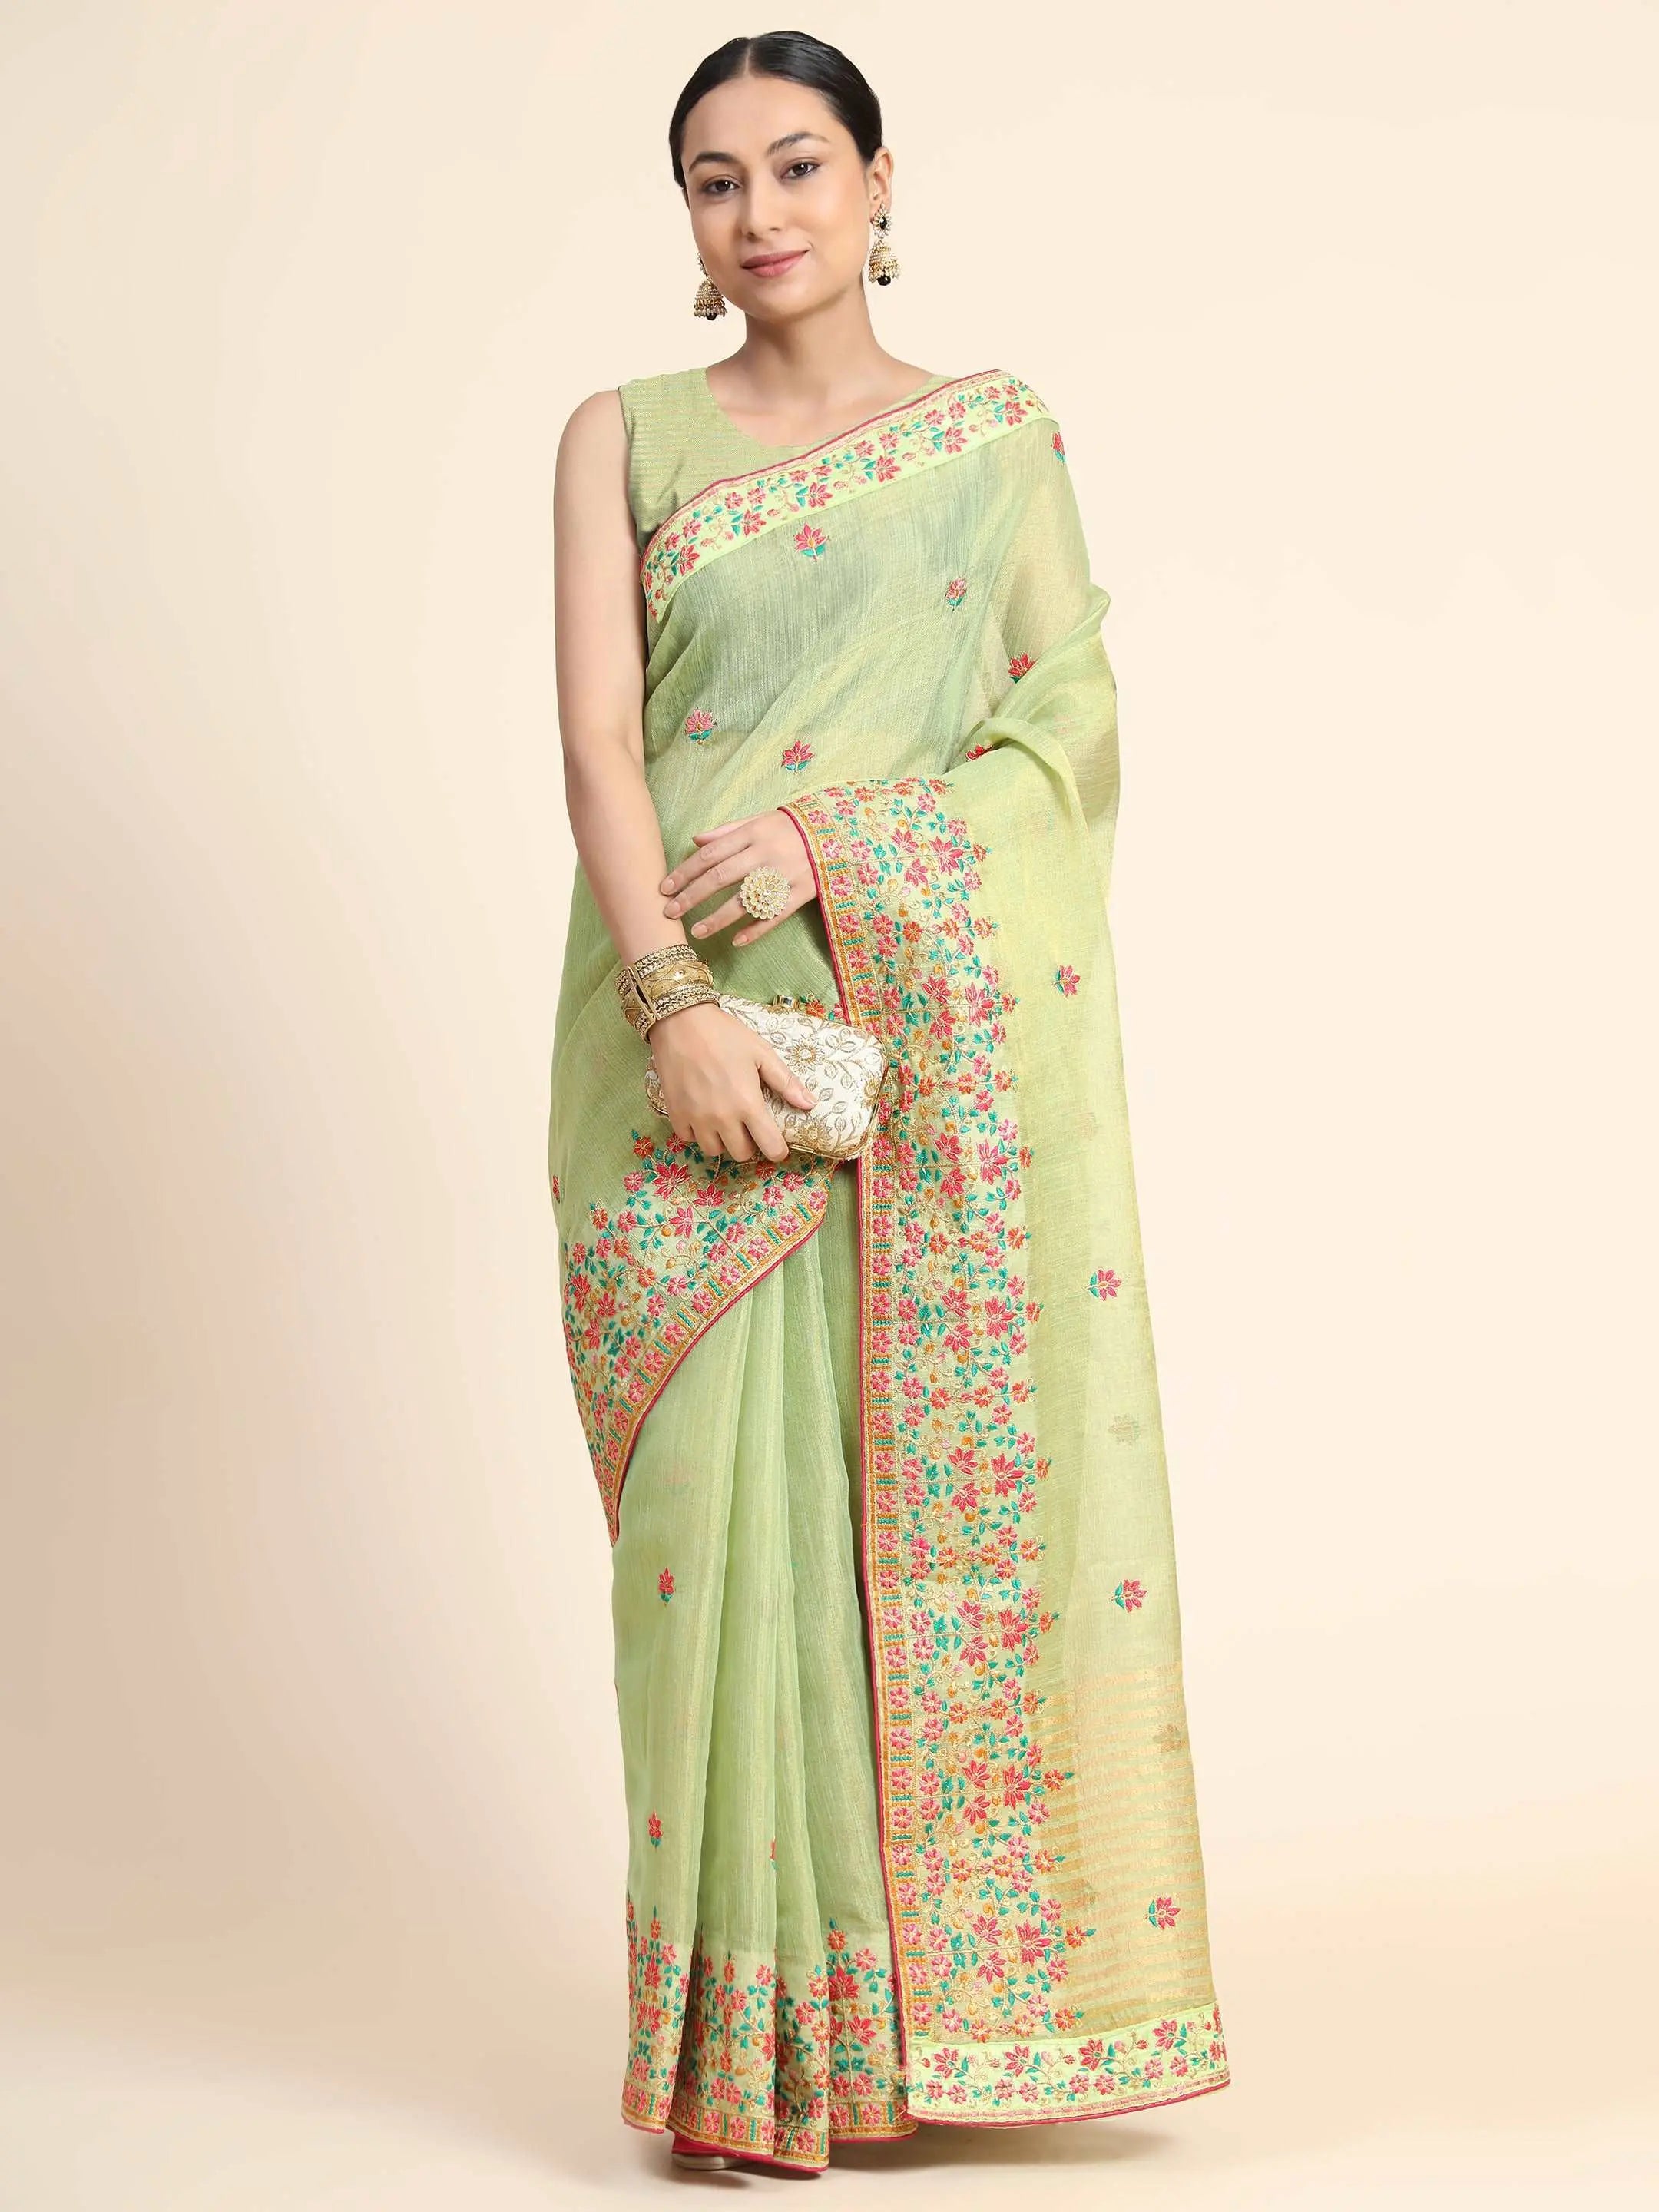 Gold Tissue Embroidered Panel Work Saree Pista Green - Colorful Saree